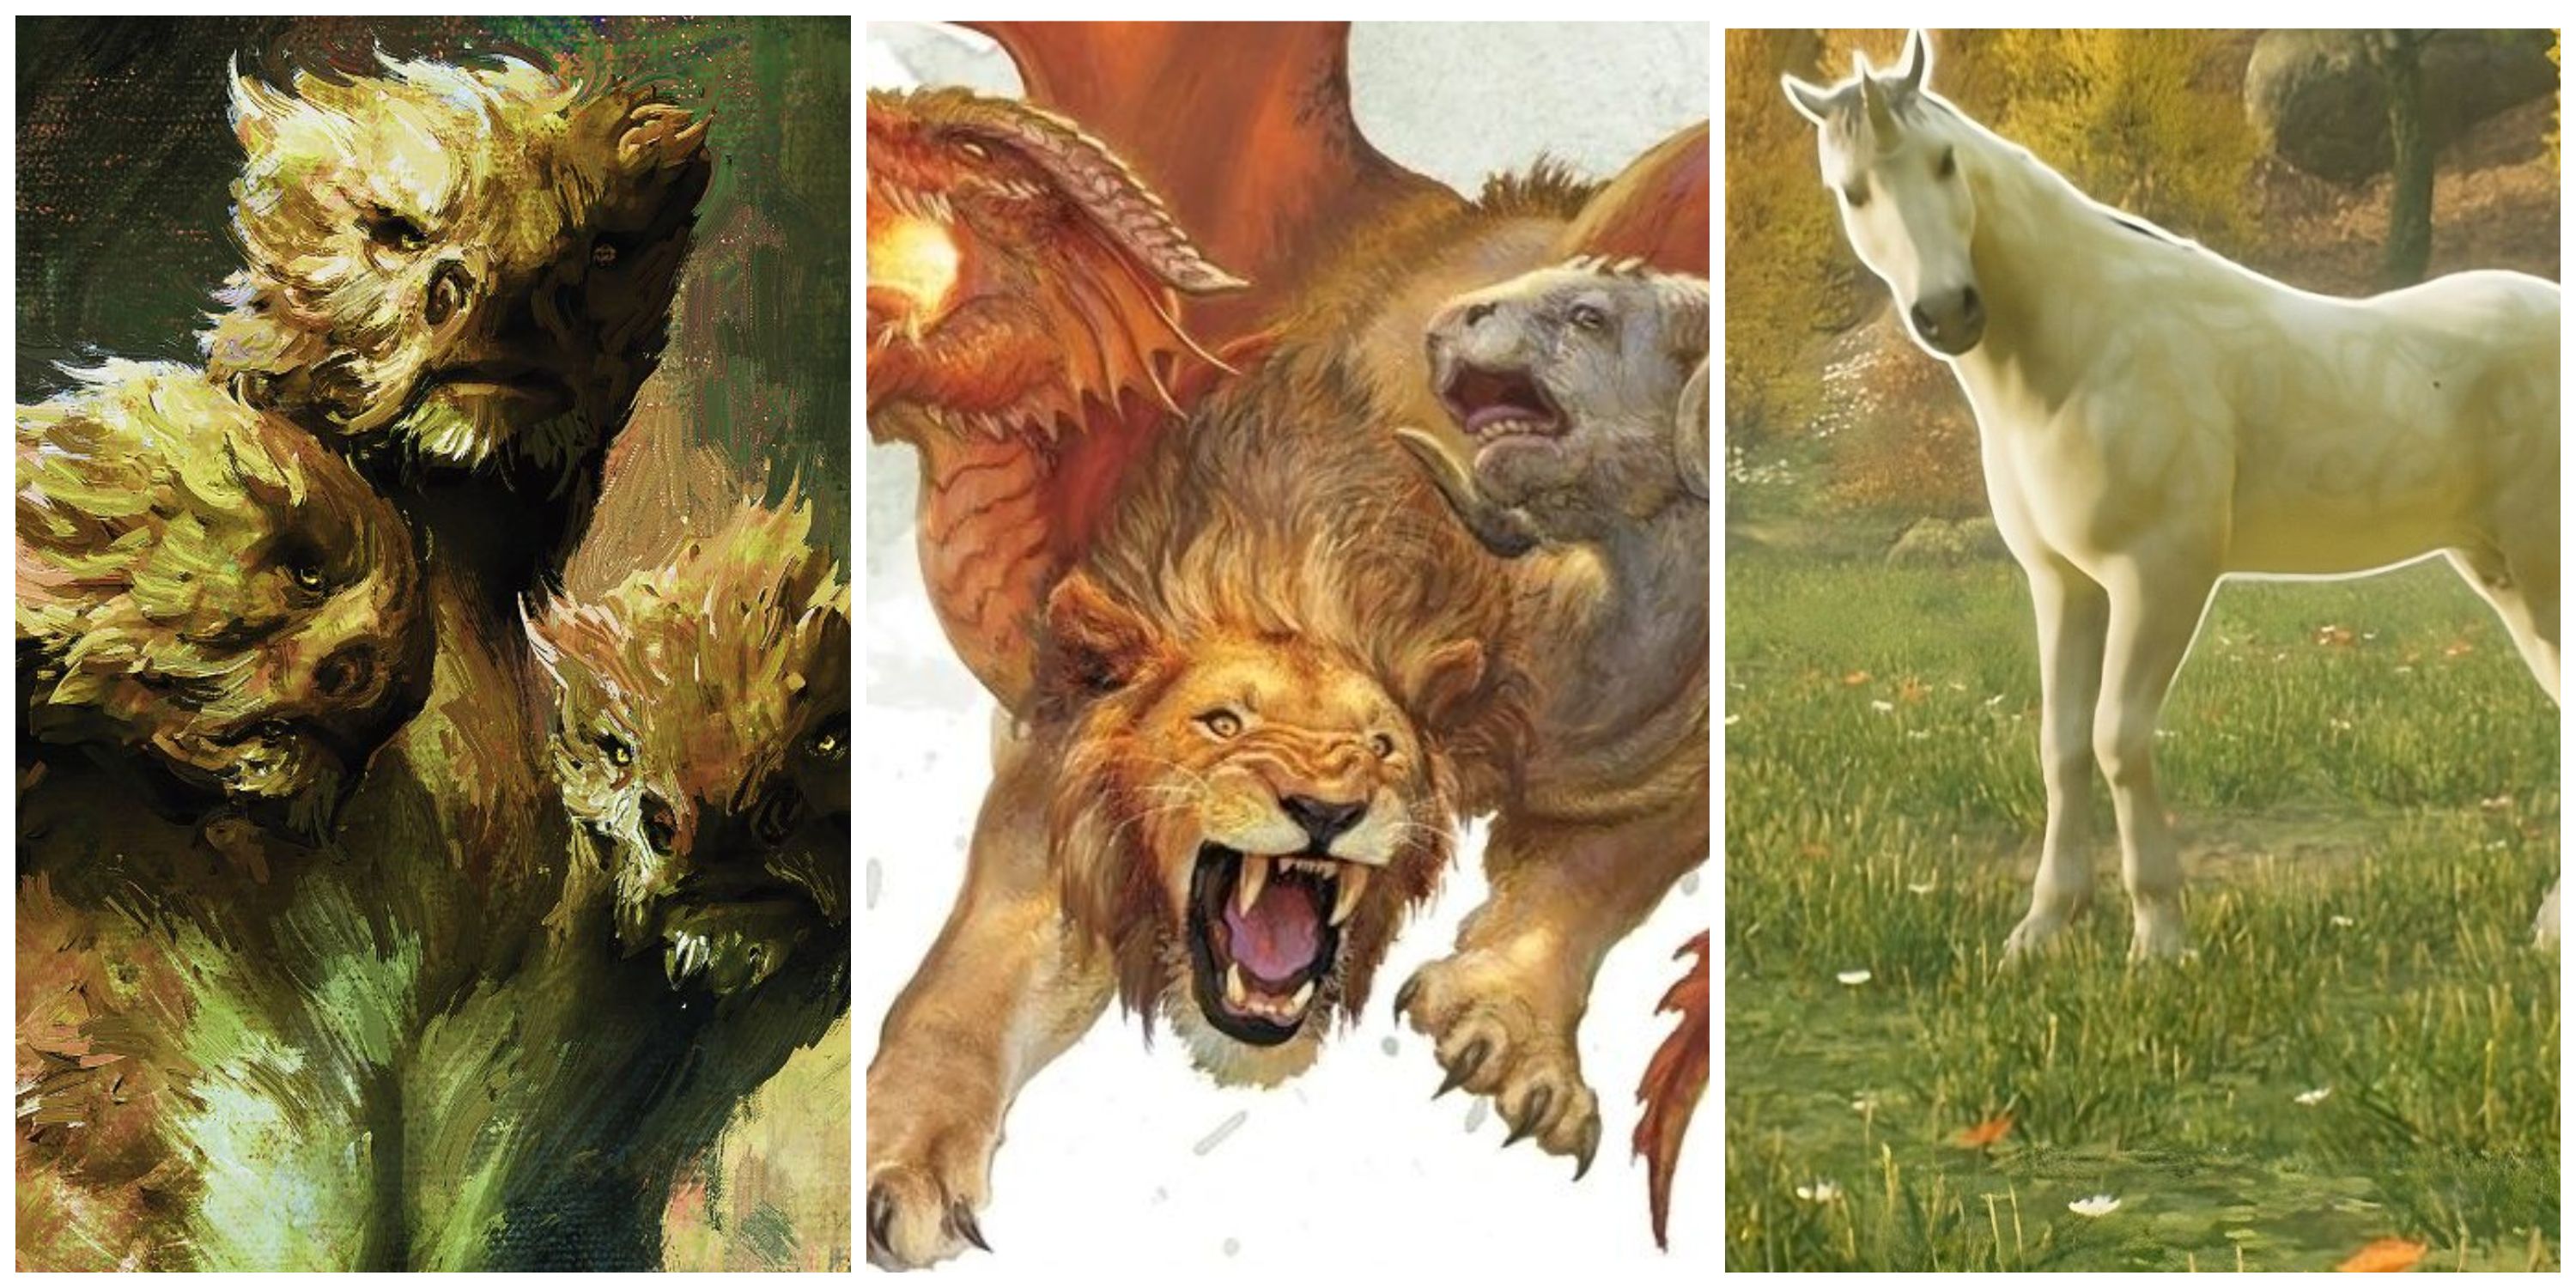 Questing Beast, Chimera and Unicorn Magical Creatures